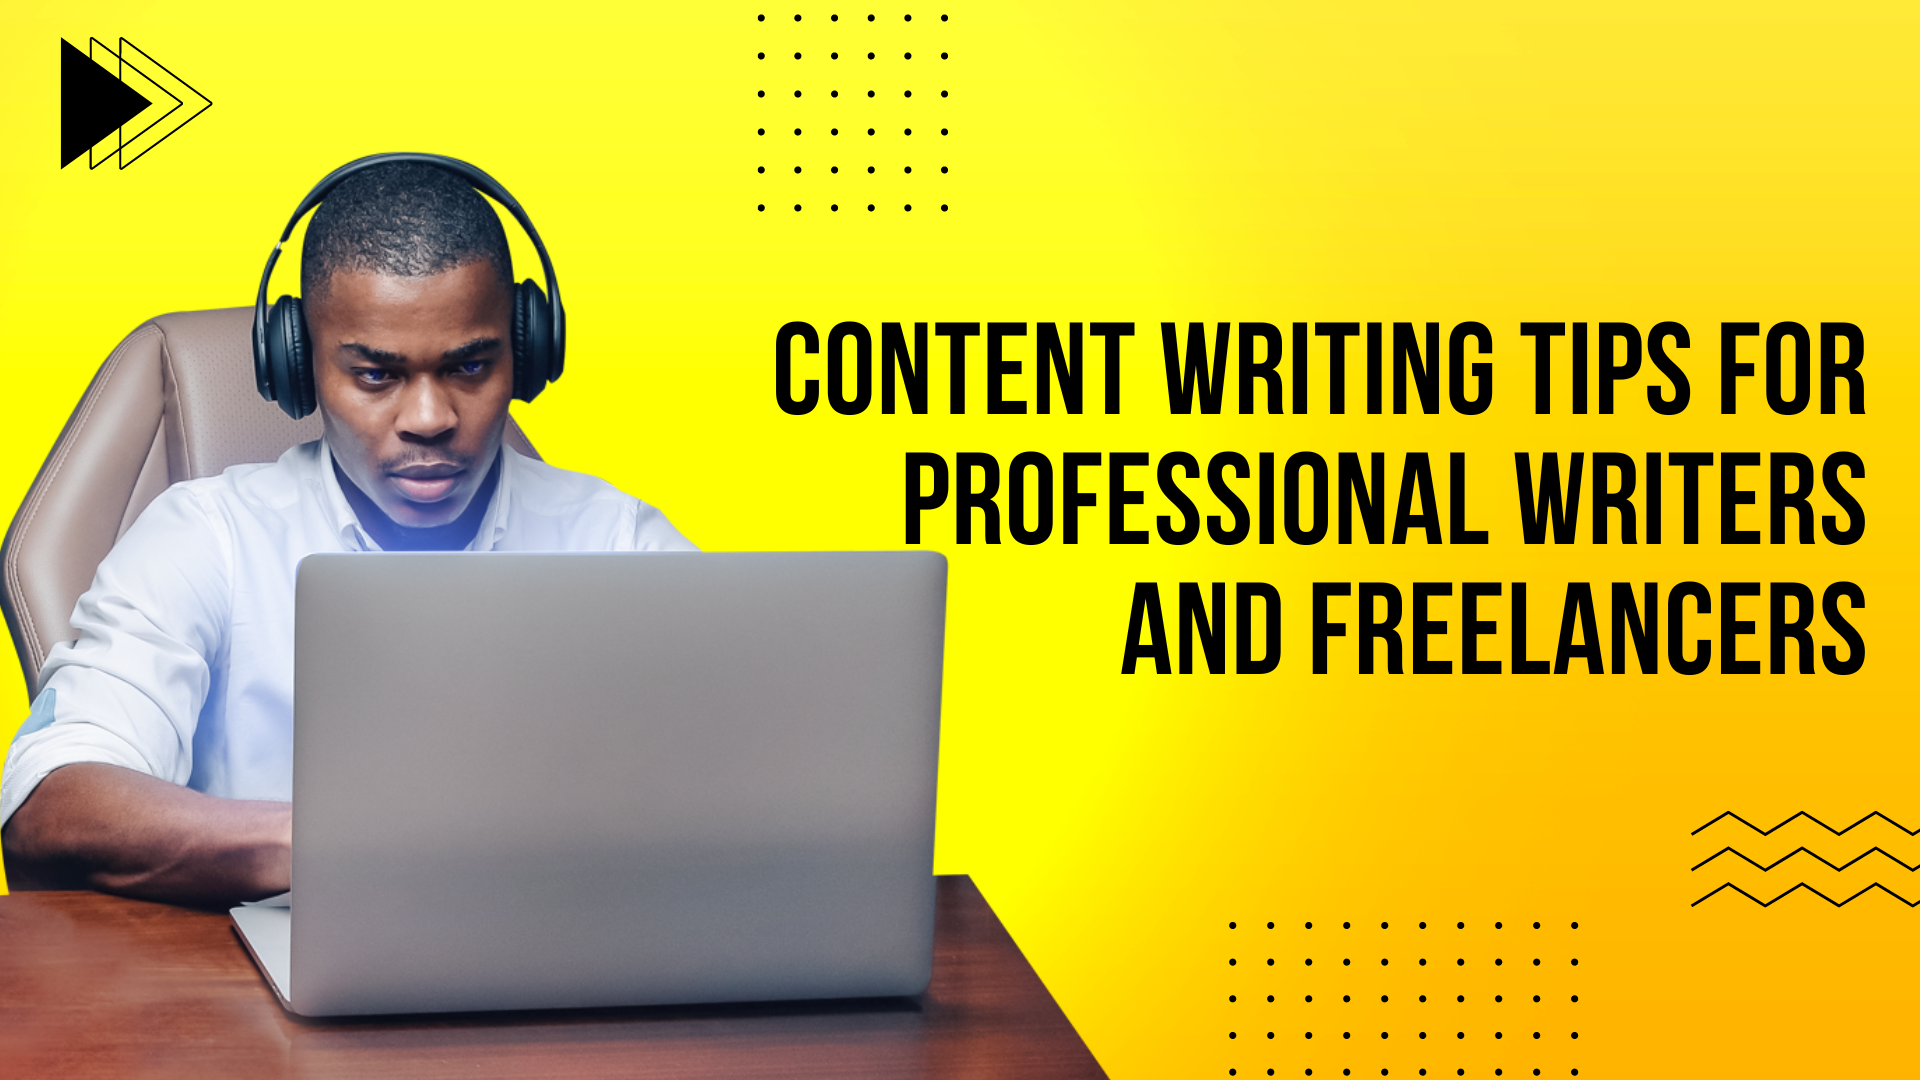 Content Writing Tips for Professional Writers and Freelancers